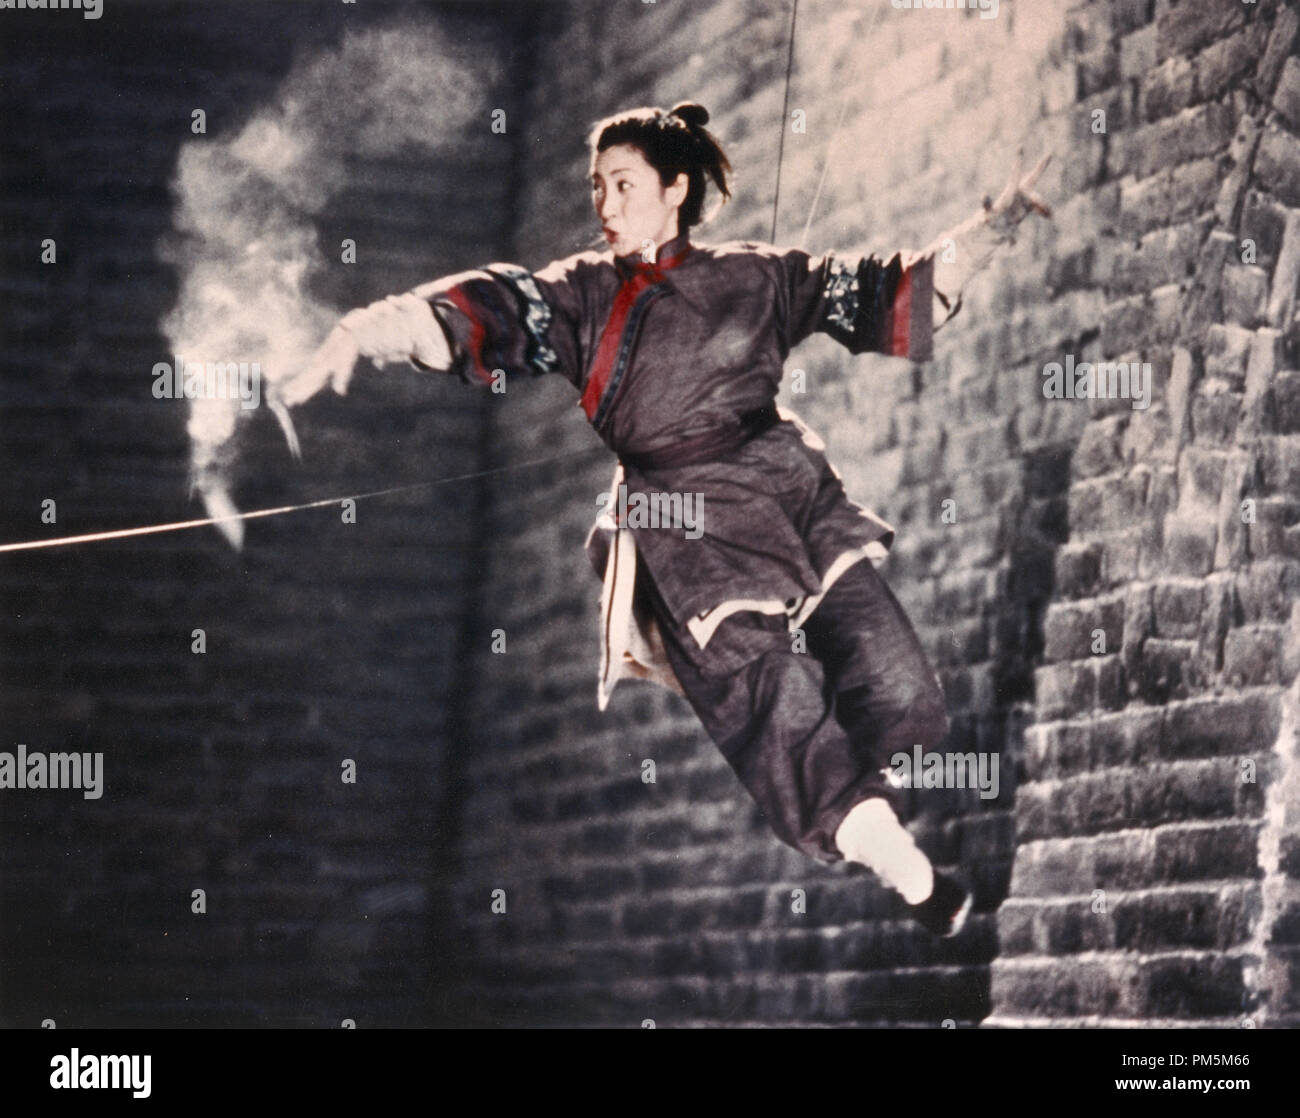 Film Still / Publicity Stills from 'Crouching Tiger, Hidden Dragon' Michelle Yeoh © 2000 Sony Pictures Classics Photo Credit: Chan Kam Chuen File Reference # 30846671THA  For Editorial Use Only -  All Rights Reserved Stock Photo